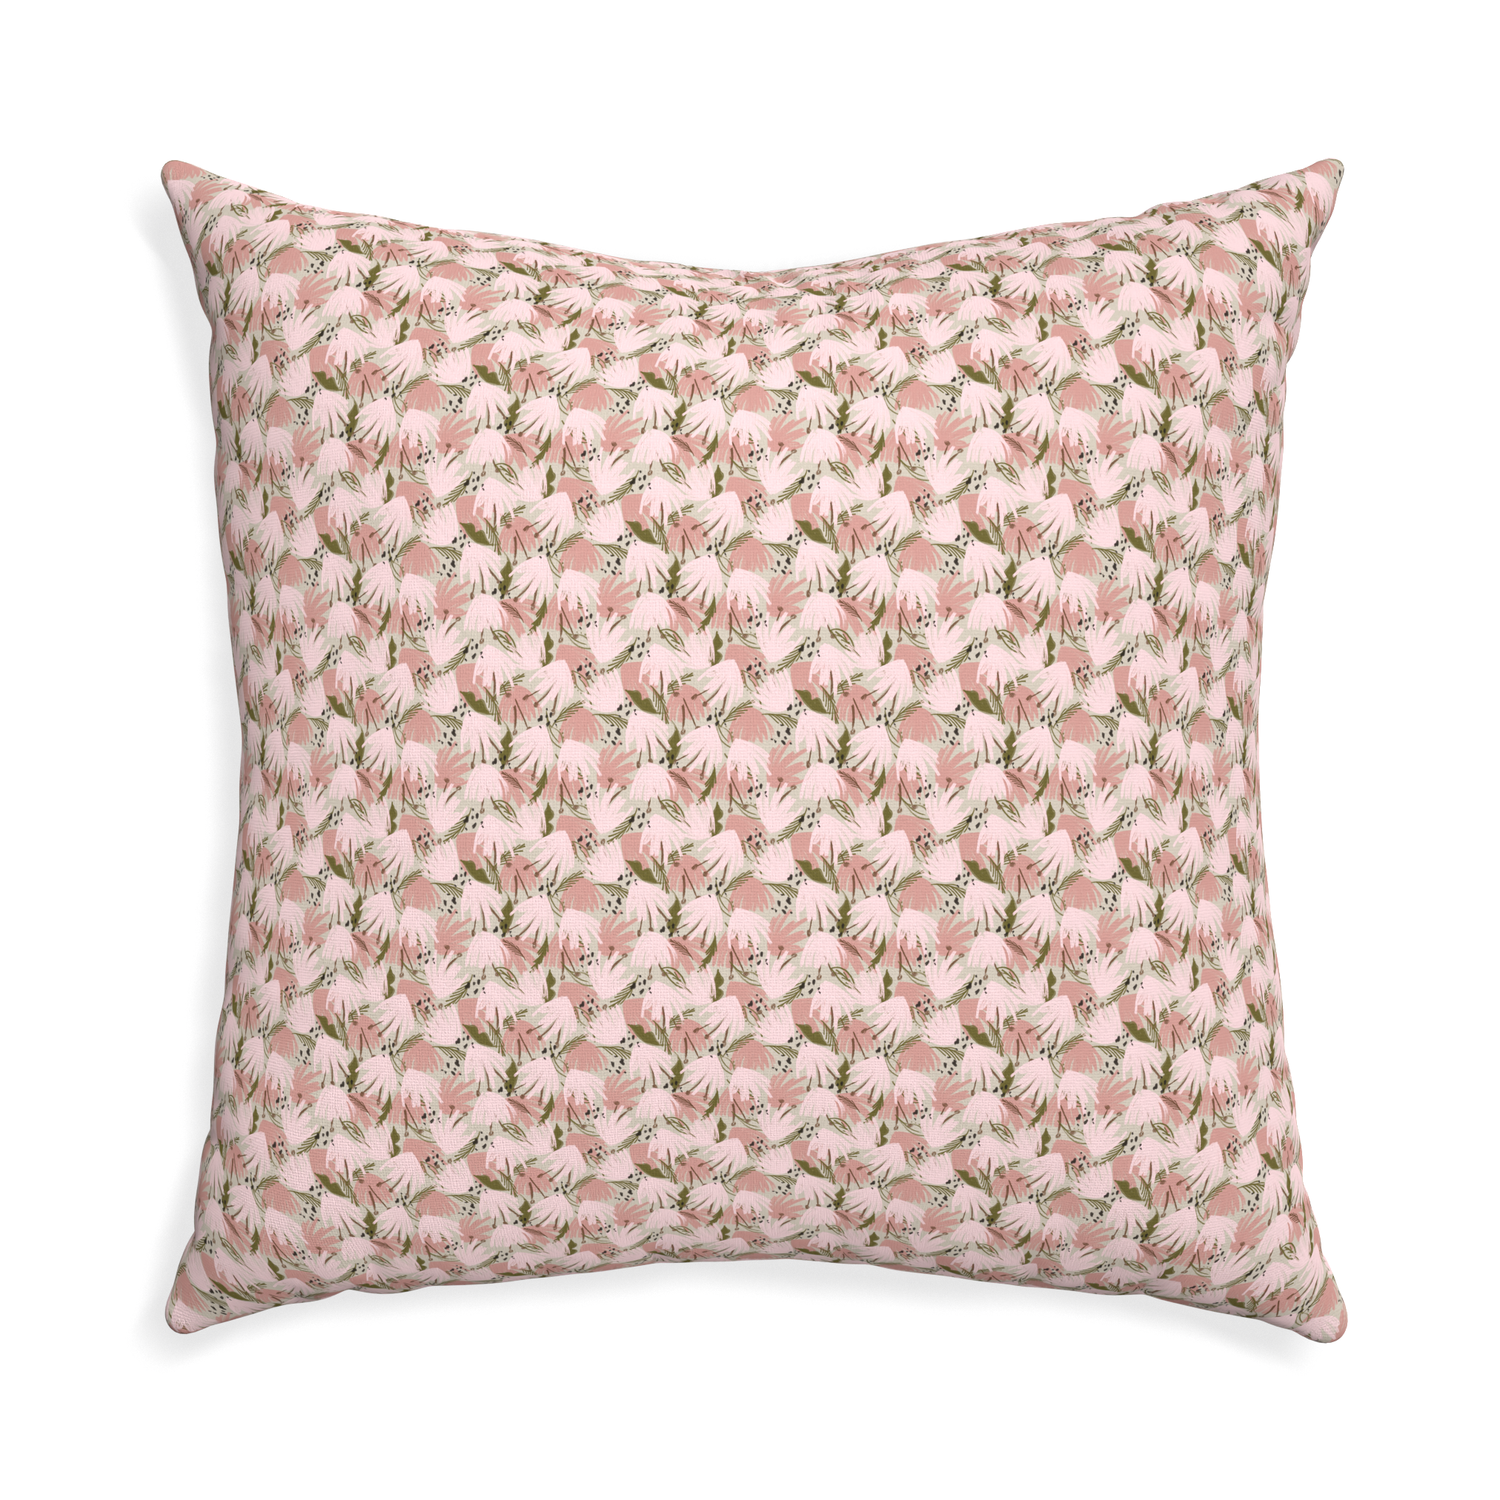 Euro-sham eden pink custom pillow with none on white background